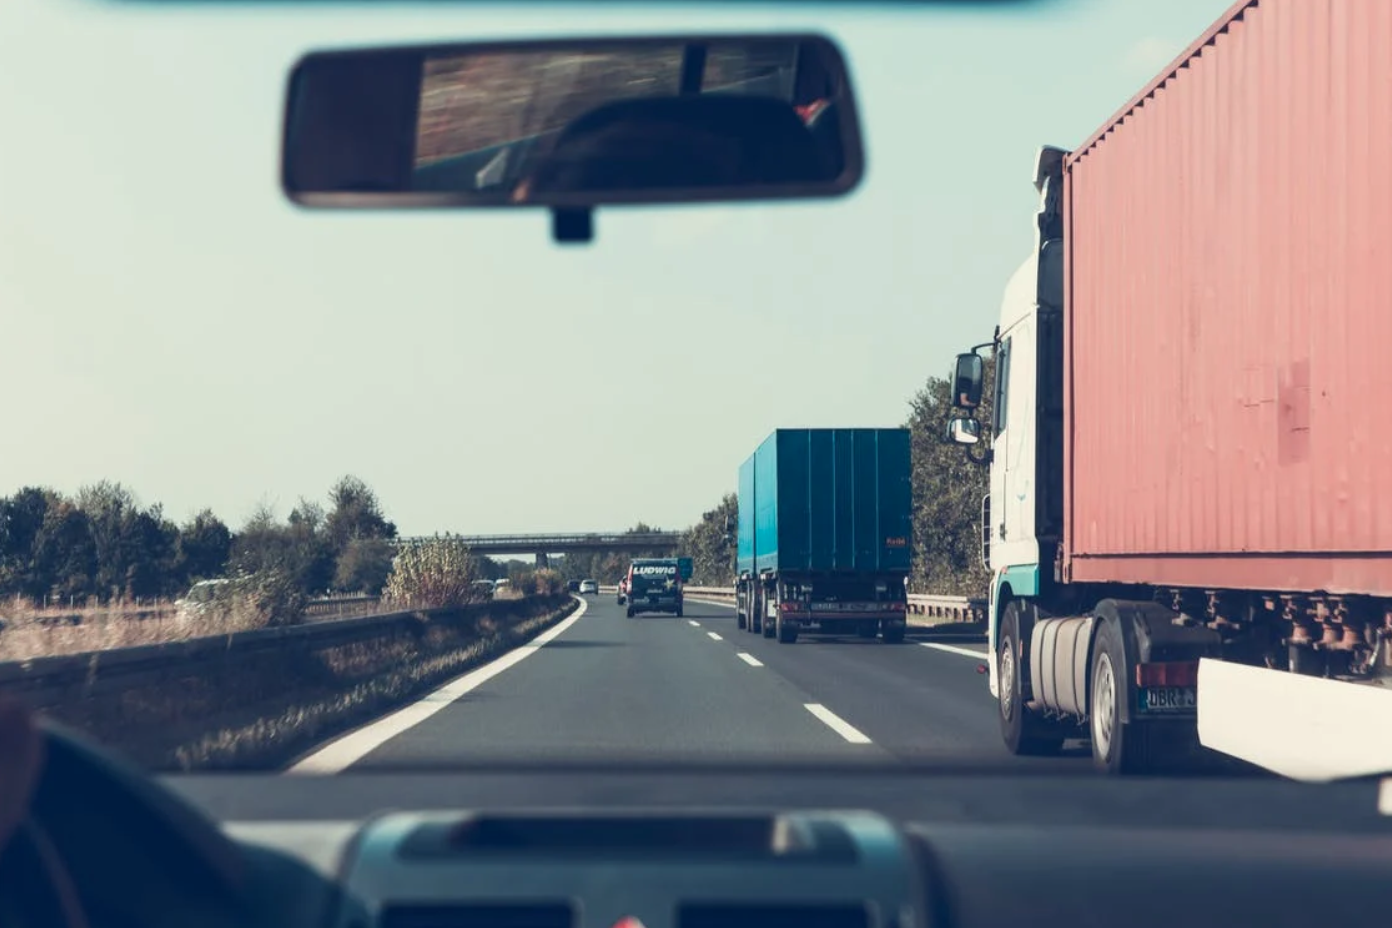 A blue and a red truck on the road; image by Markus Spiske, via Pexels.com.